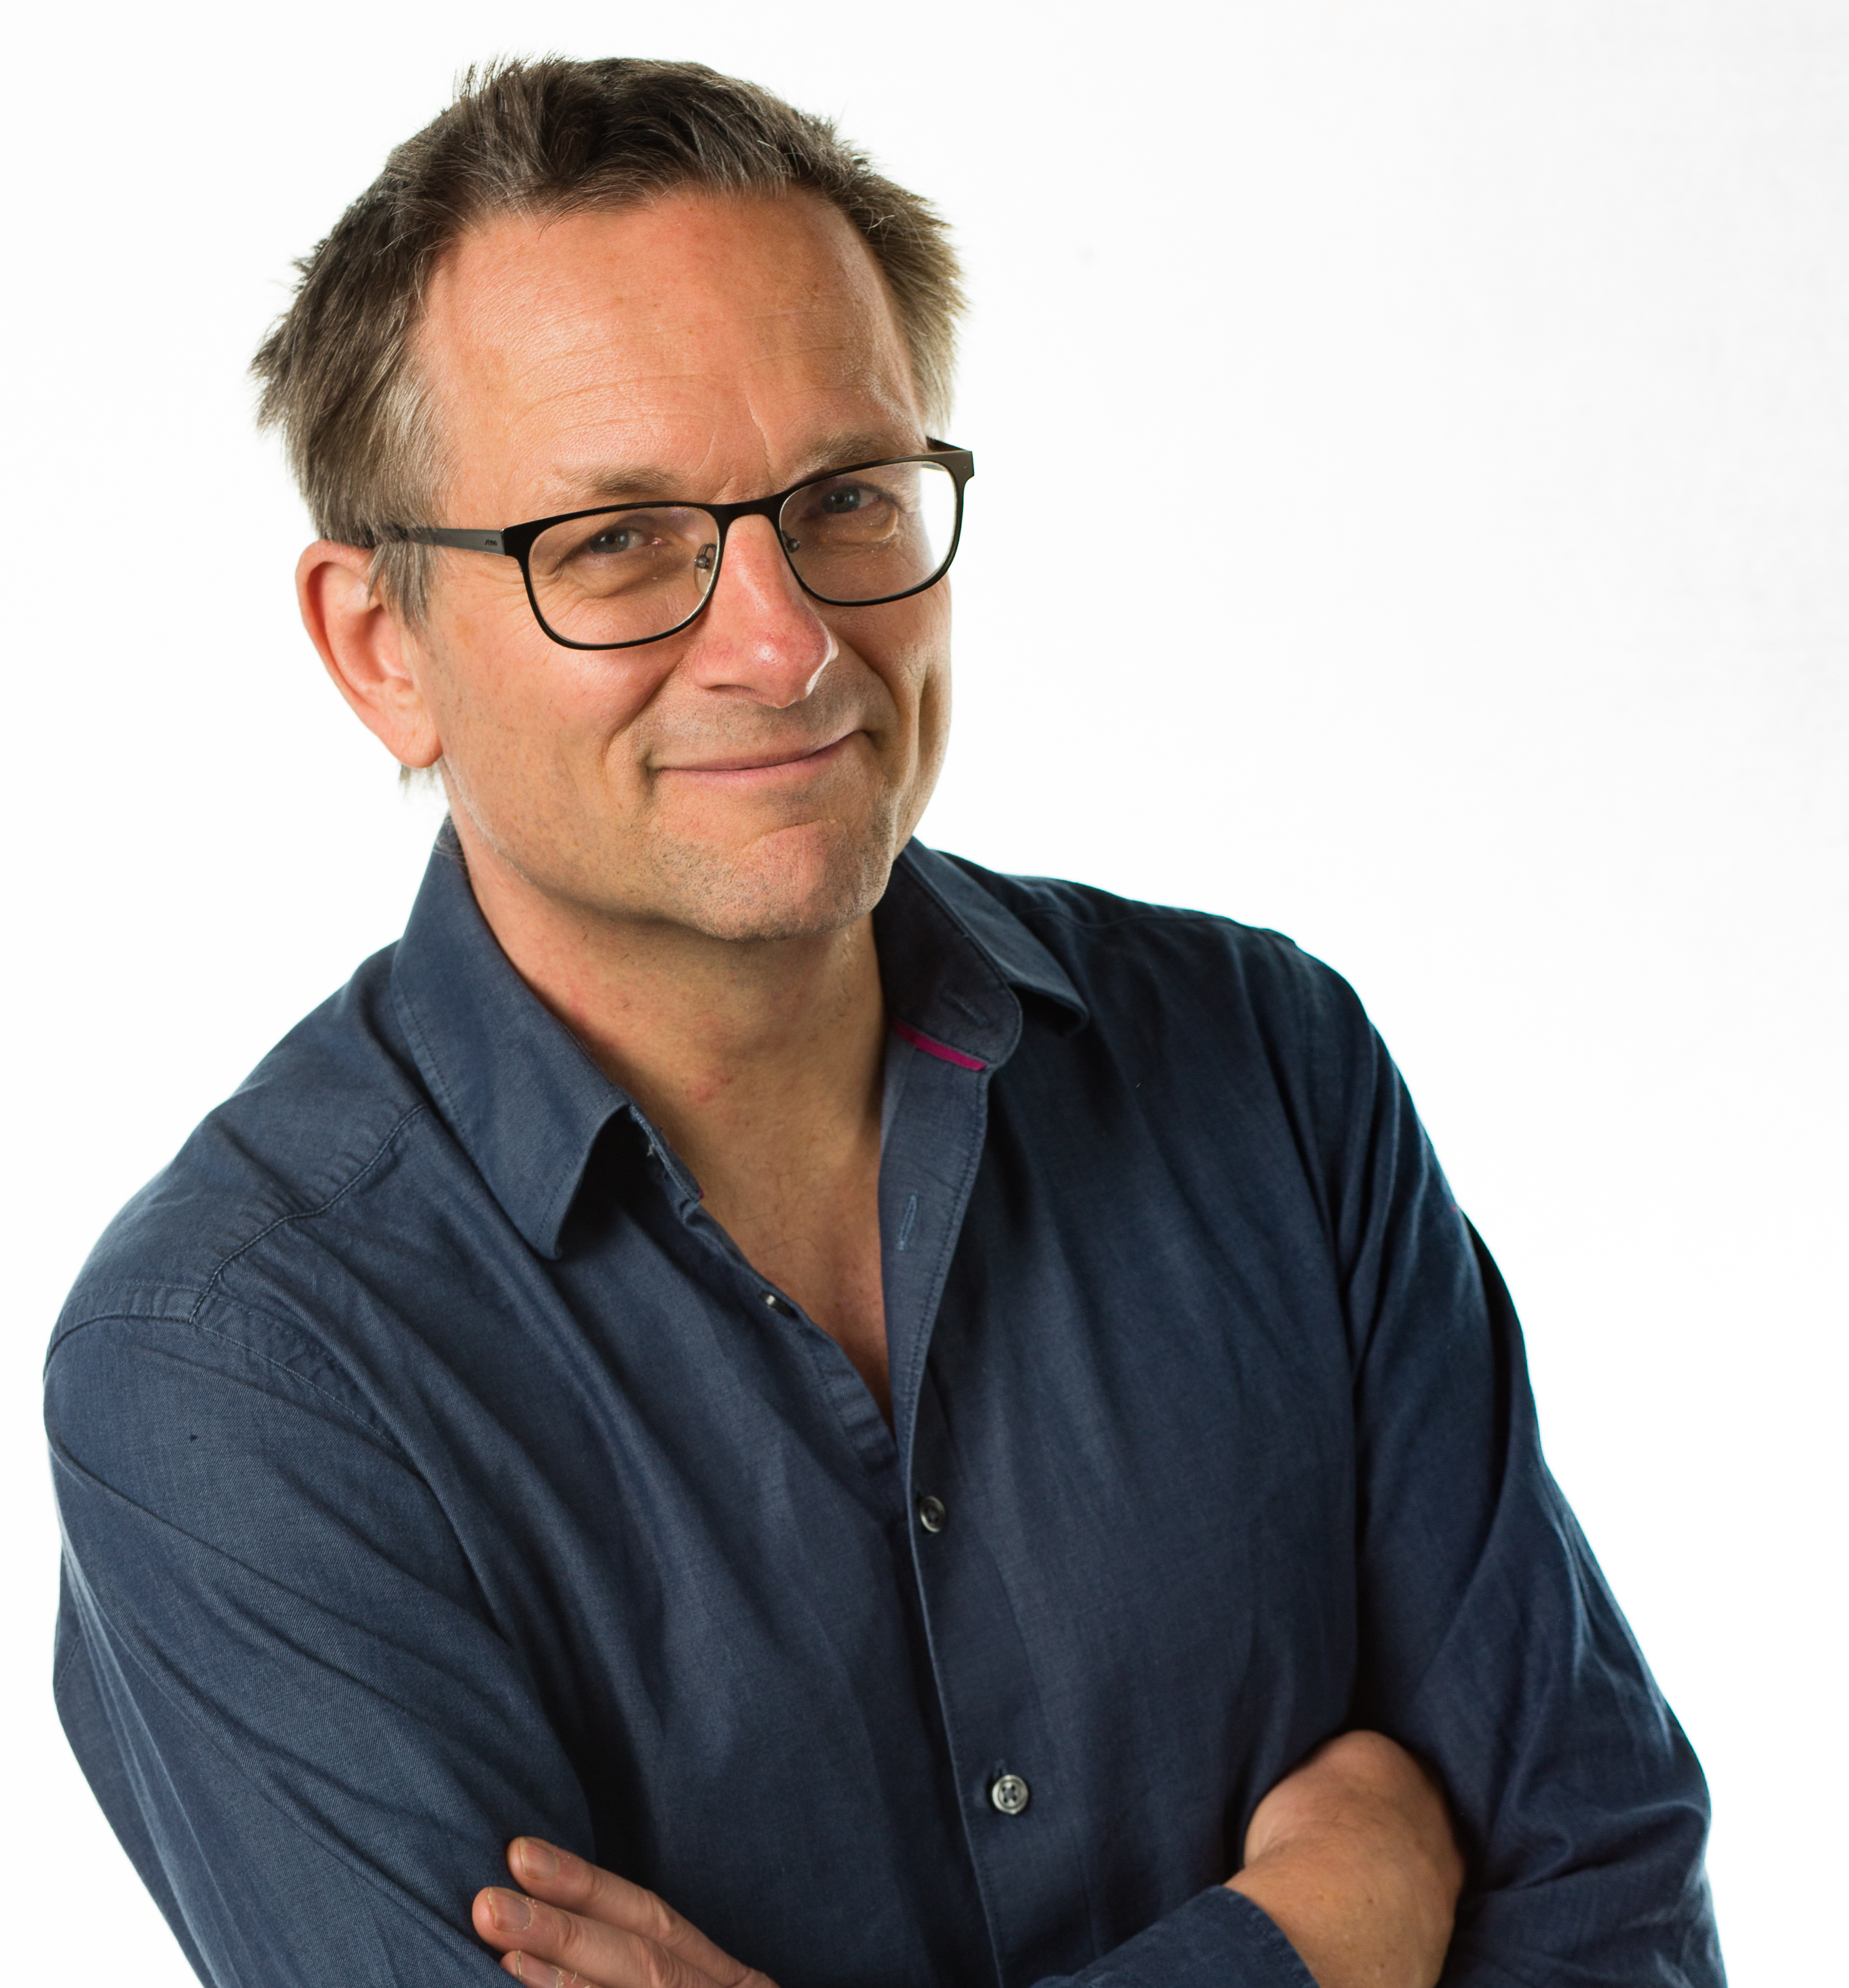 DR MICHAEL MOSLEY